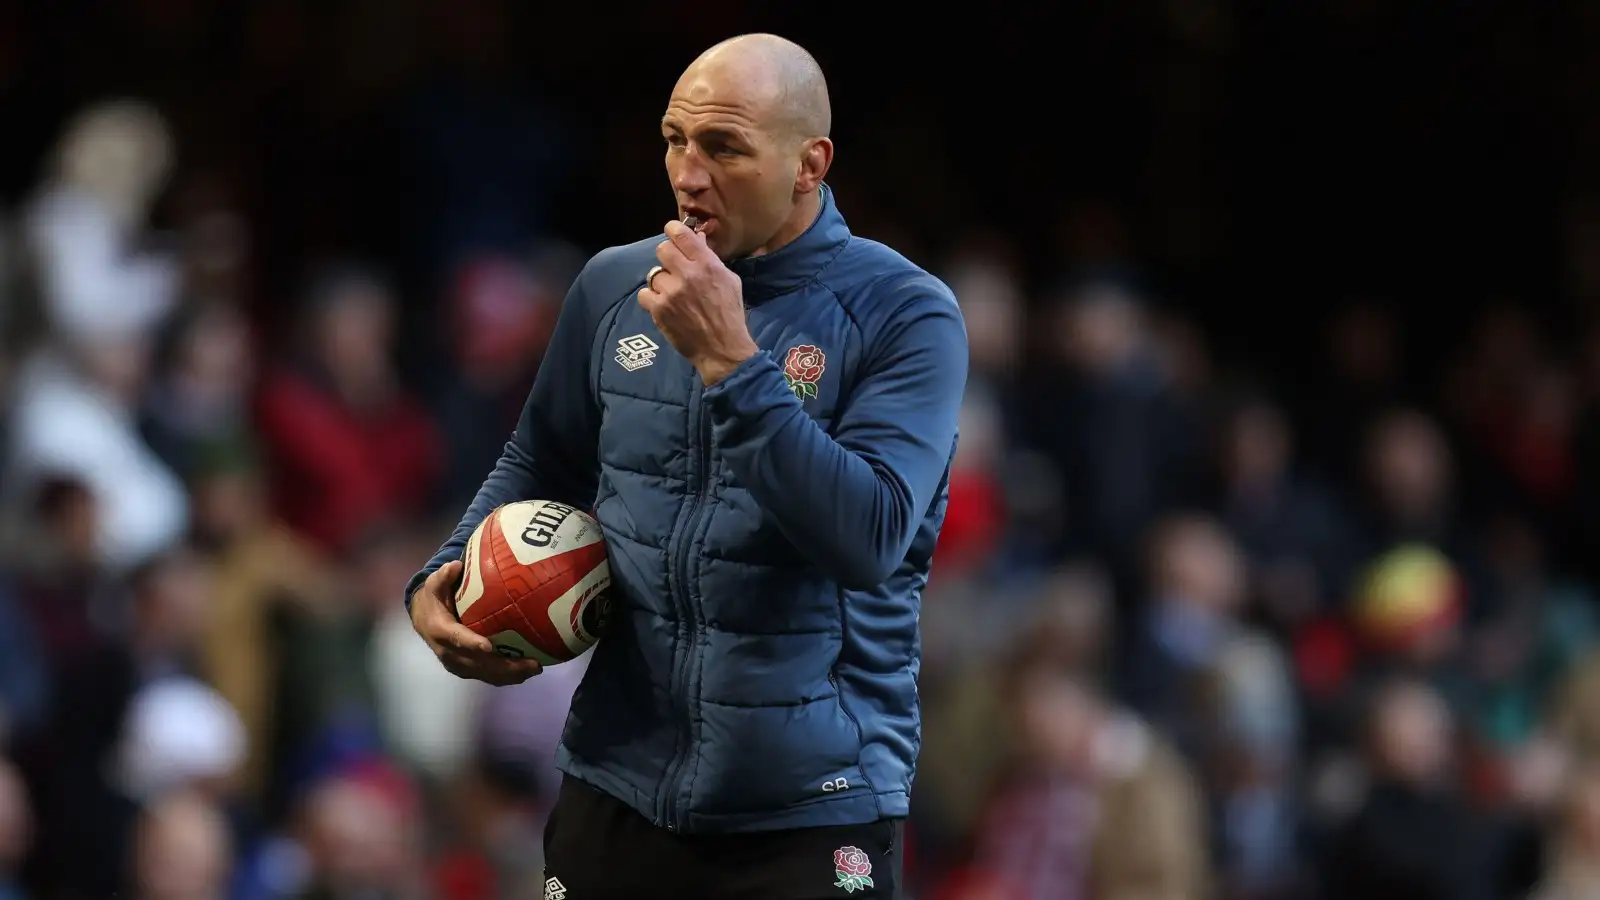 England coach Steve Borthwick during a warm up against Wales